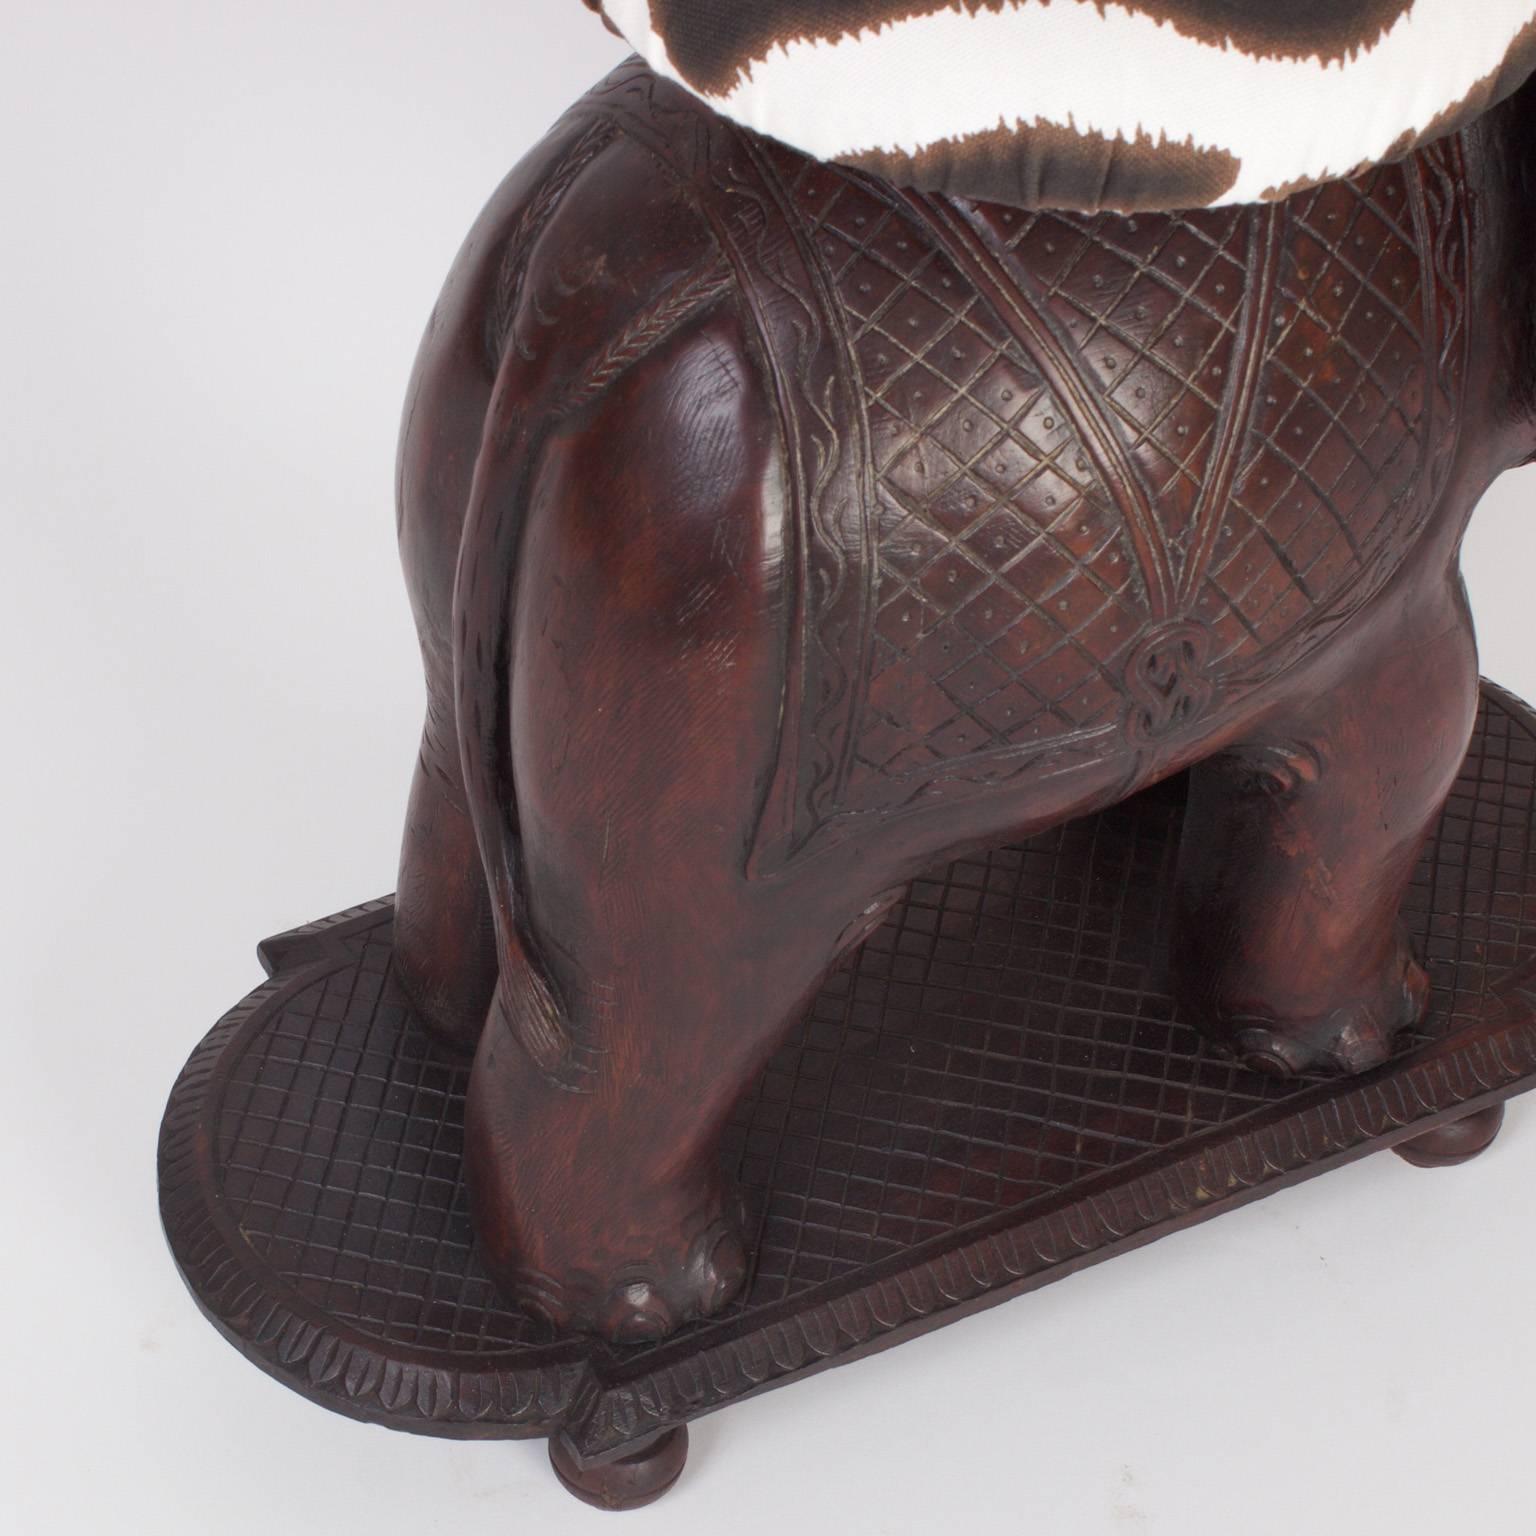 19th Century Impressive Anglo Indian Elephant Bench or Stool